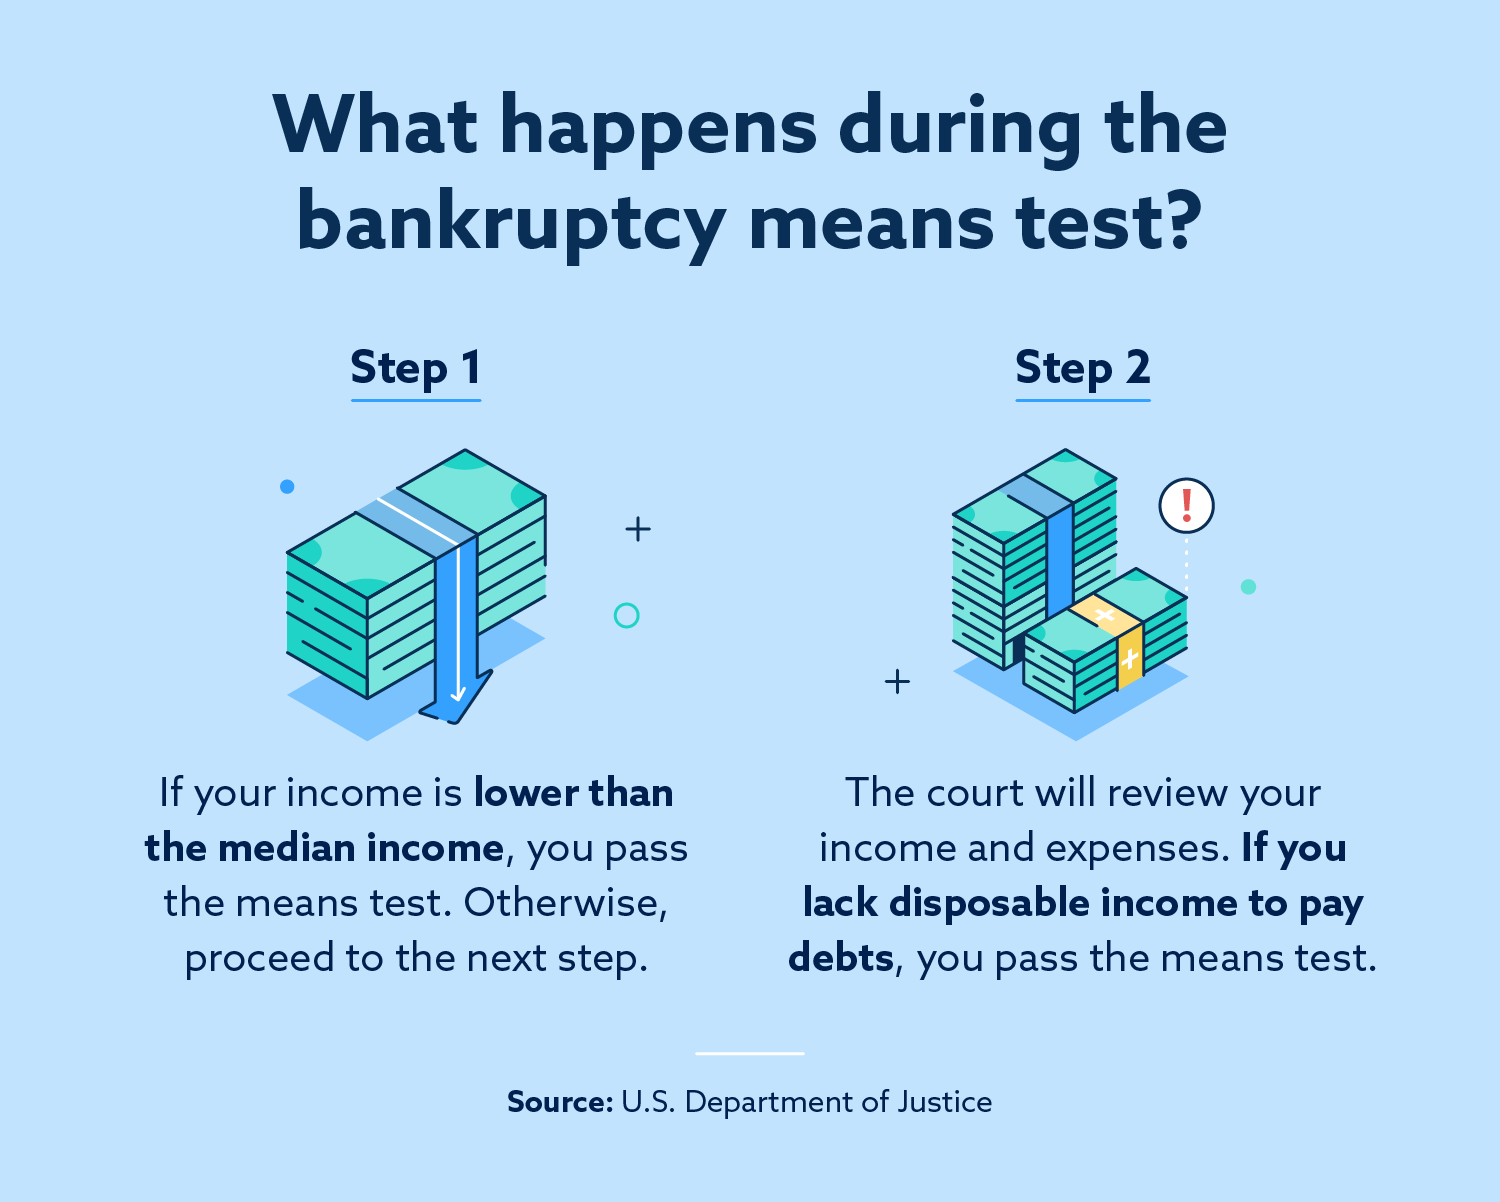 What does the bankruptcy means test involve?